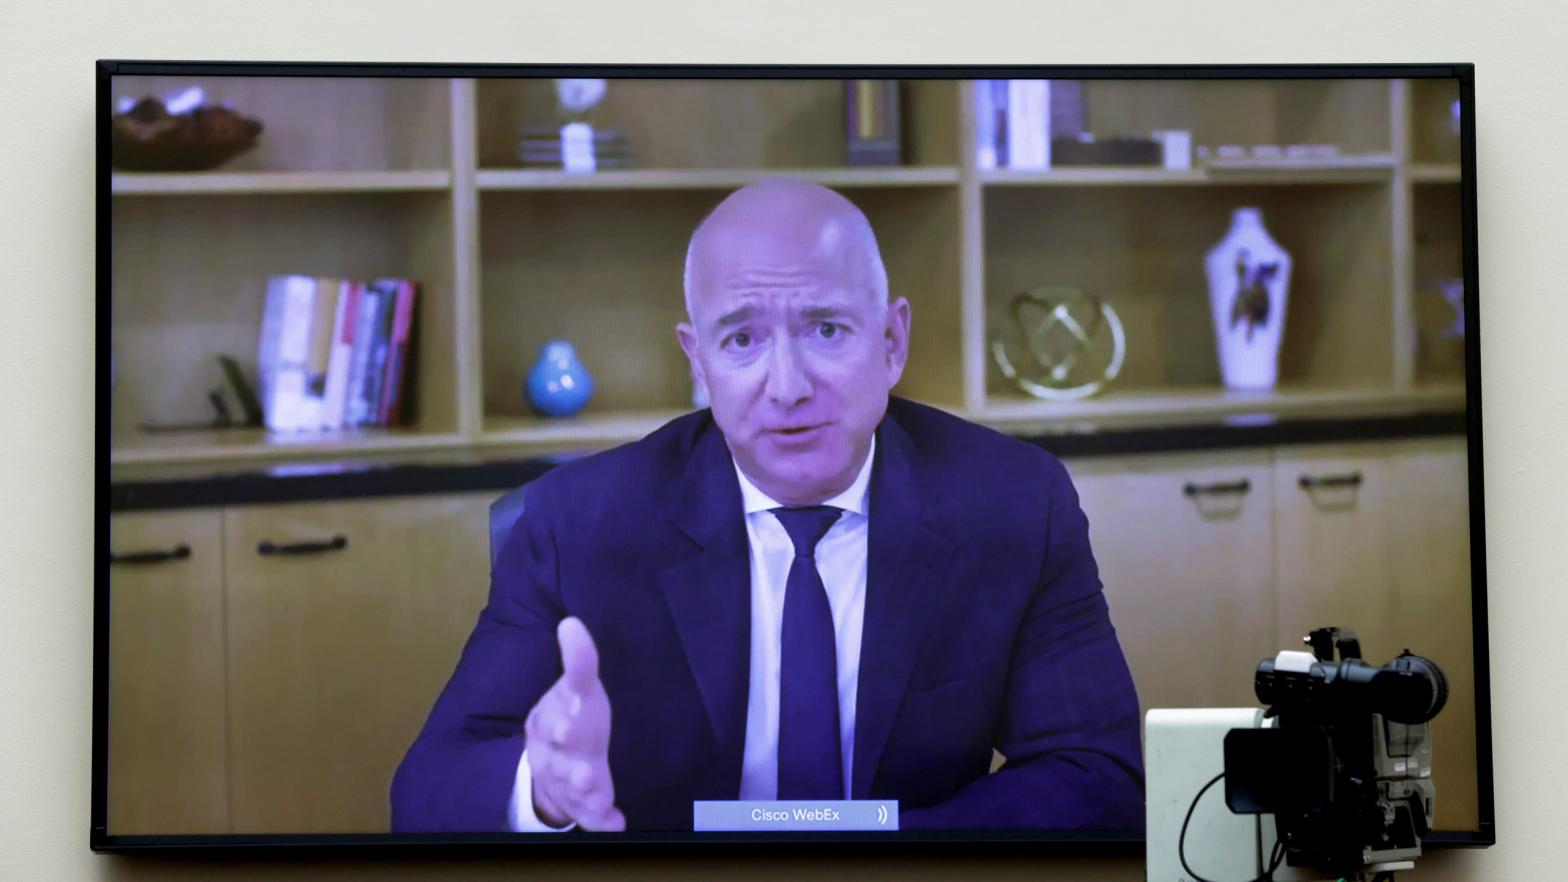 Amazon CEO Jeff Bezos testifies via video conference during the House Judiciary Committee. (Photo: Graeme Jennings-Pool, Getty Images)